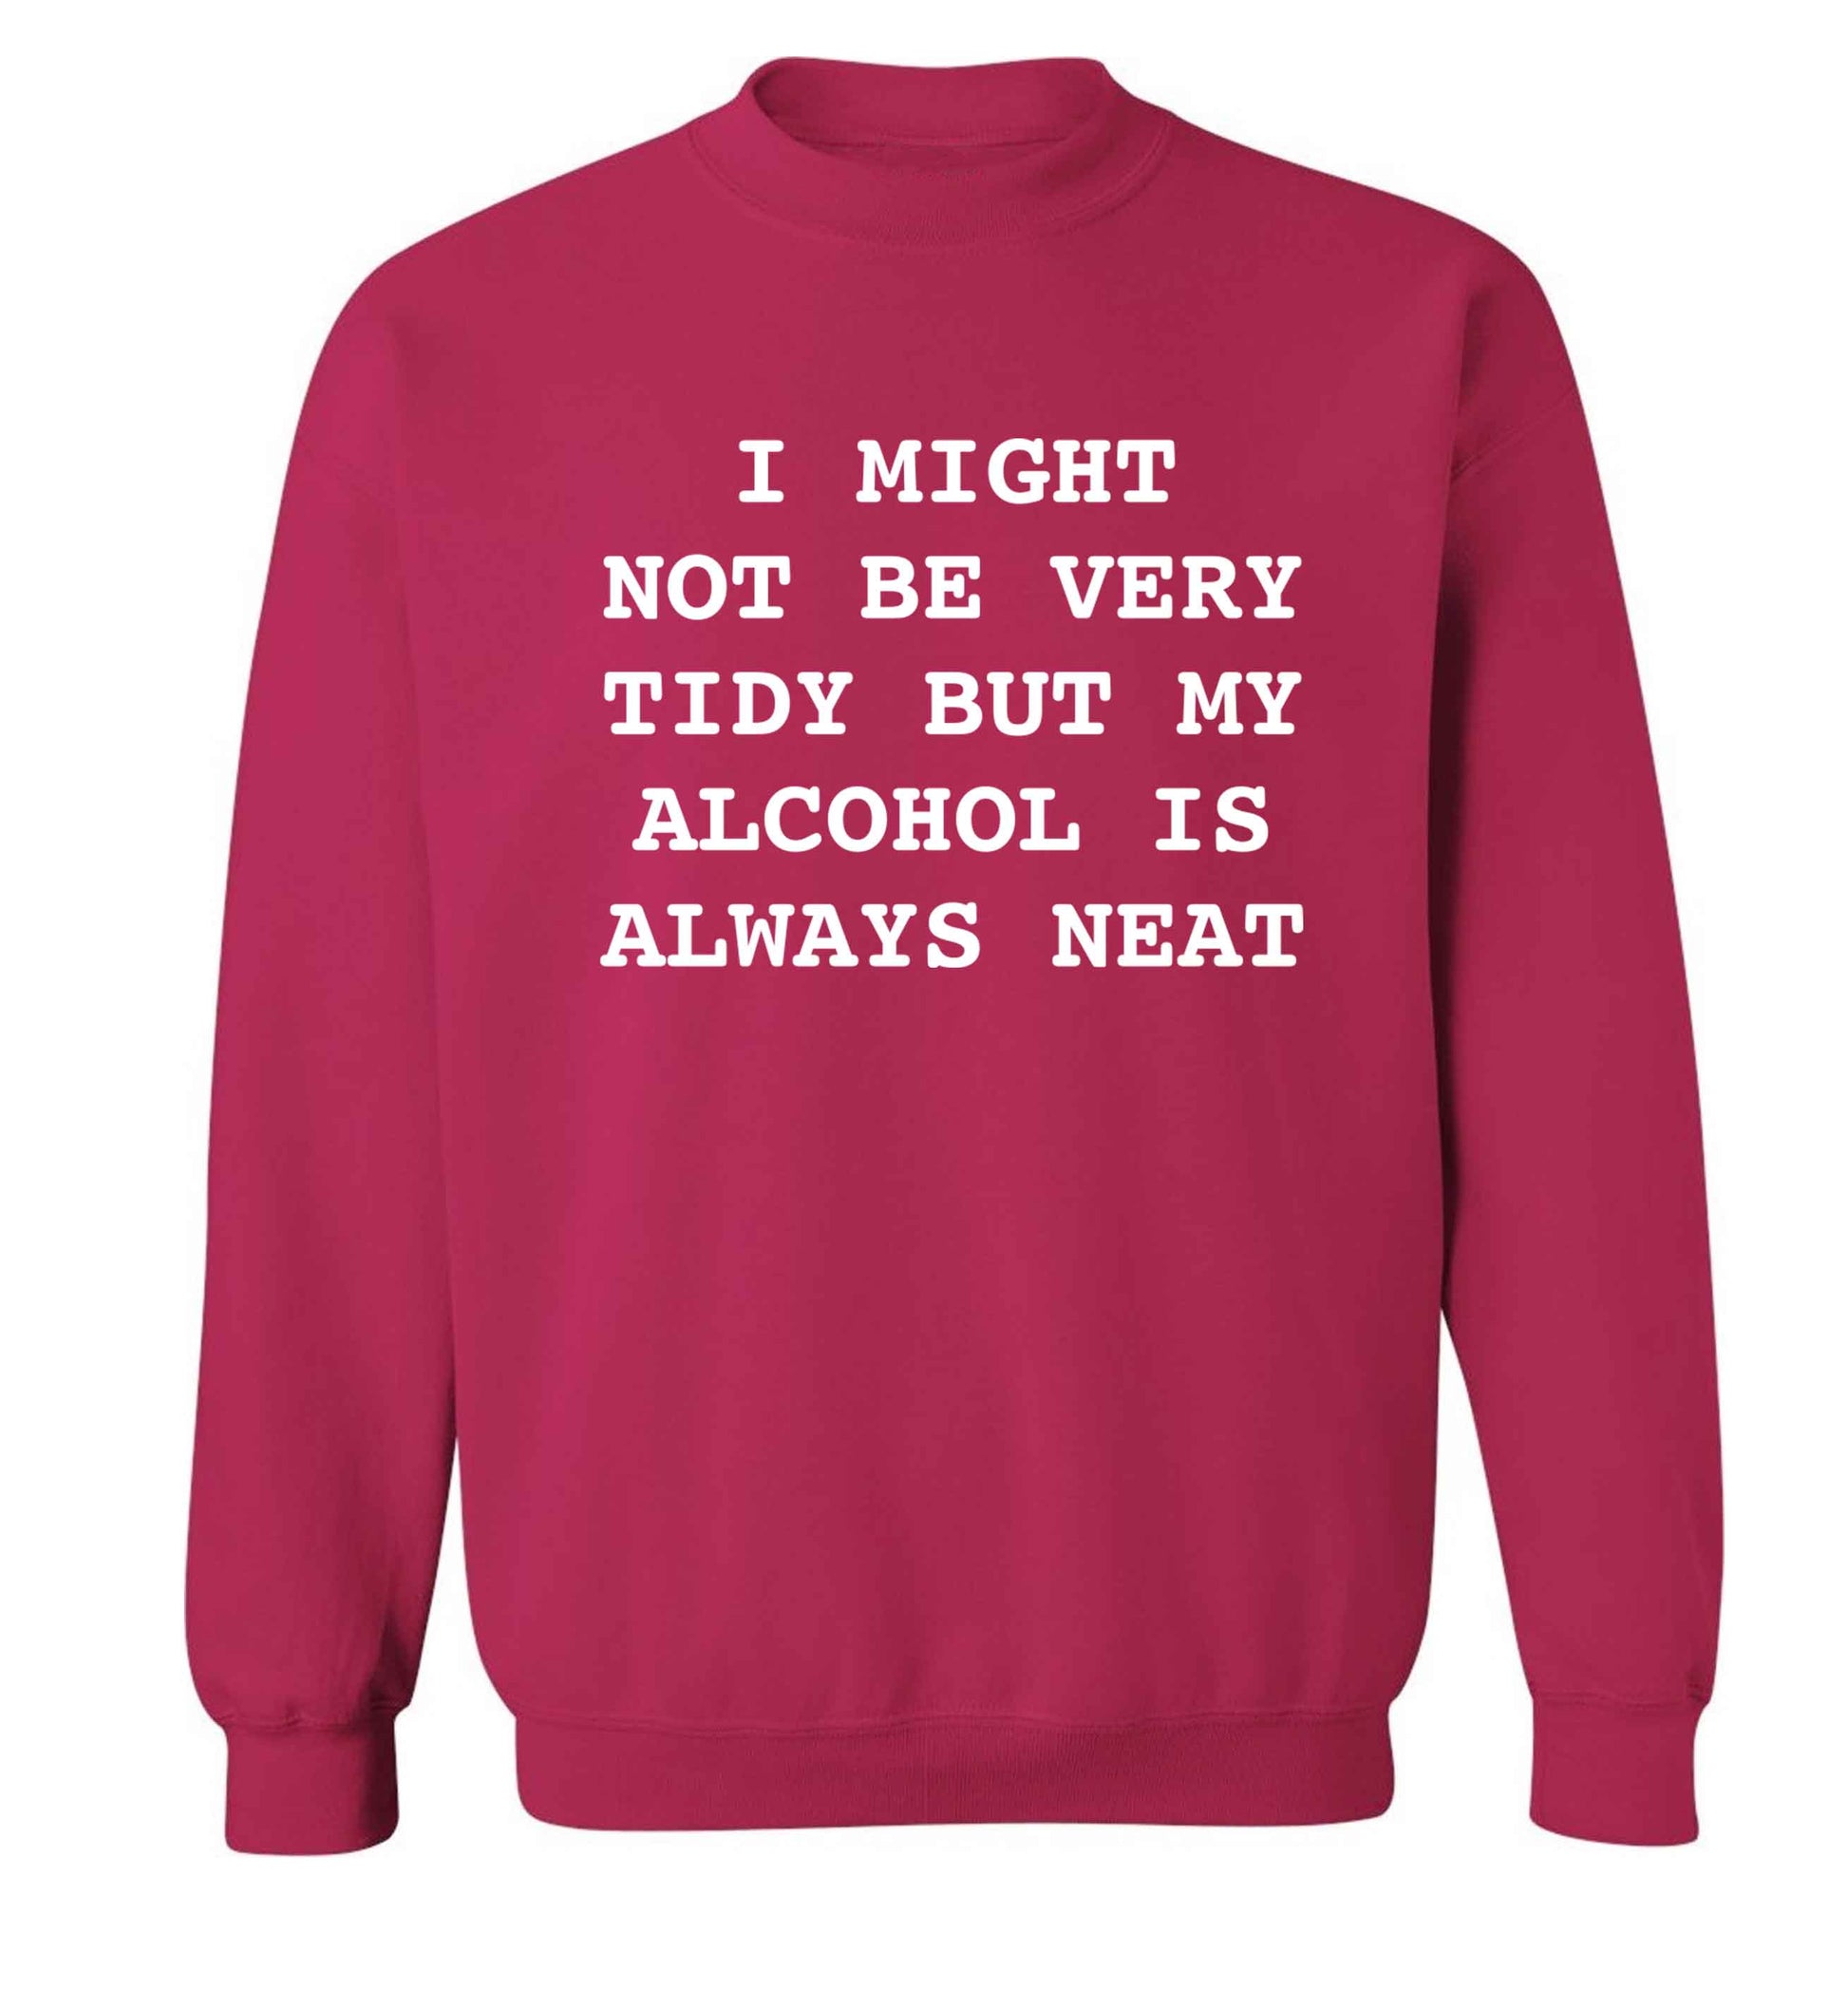 I might not be tidy but my alcohol is always neat Adult's unisex pink Sweater 2XL